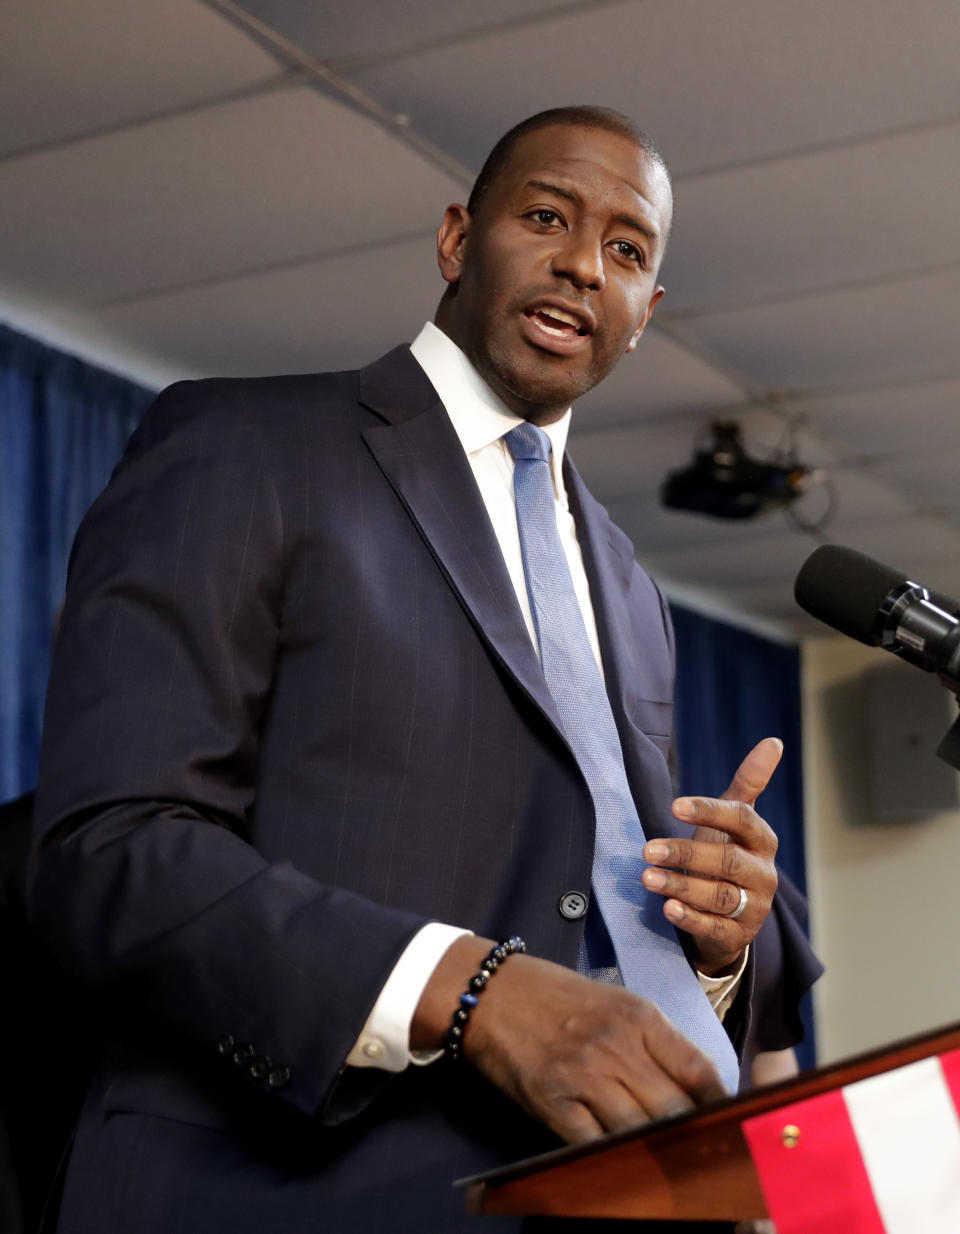 Florida Democratic gubernatorial candidate Andrew Gillum speaks to supporters during a Democratic Party rally Friday, Aug. 31, 2018, in Orlando, Fla. (AP Photo/John Raoux)